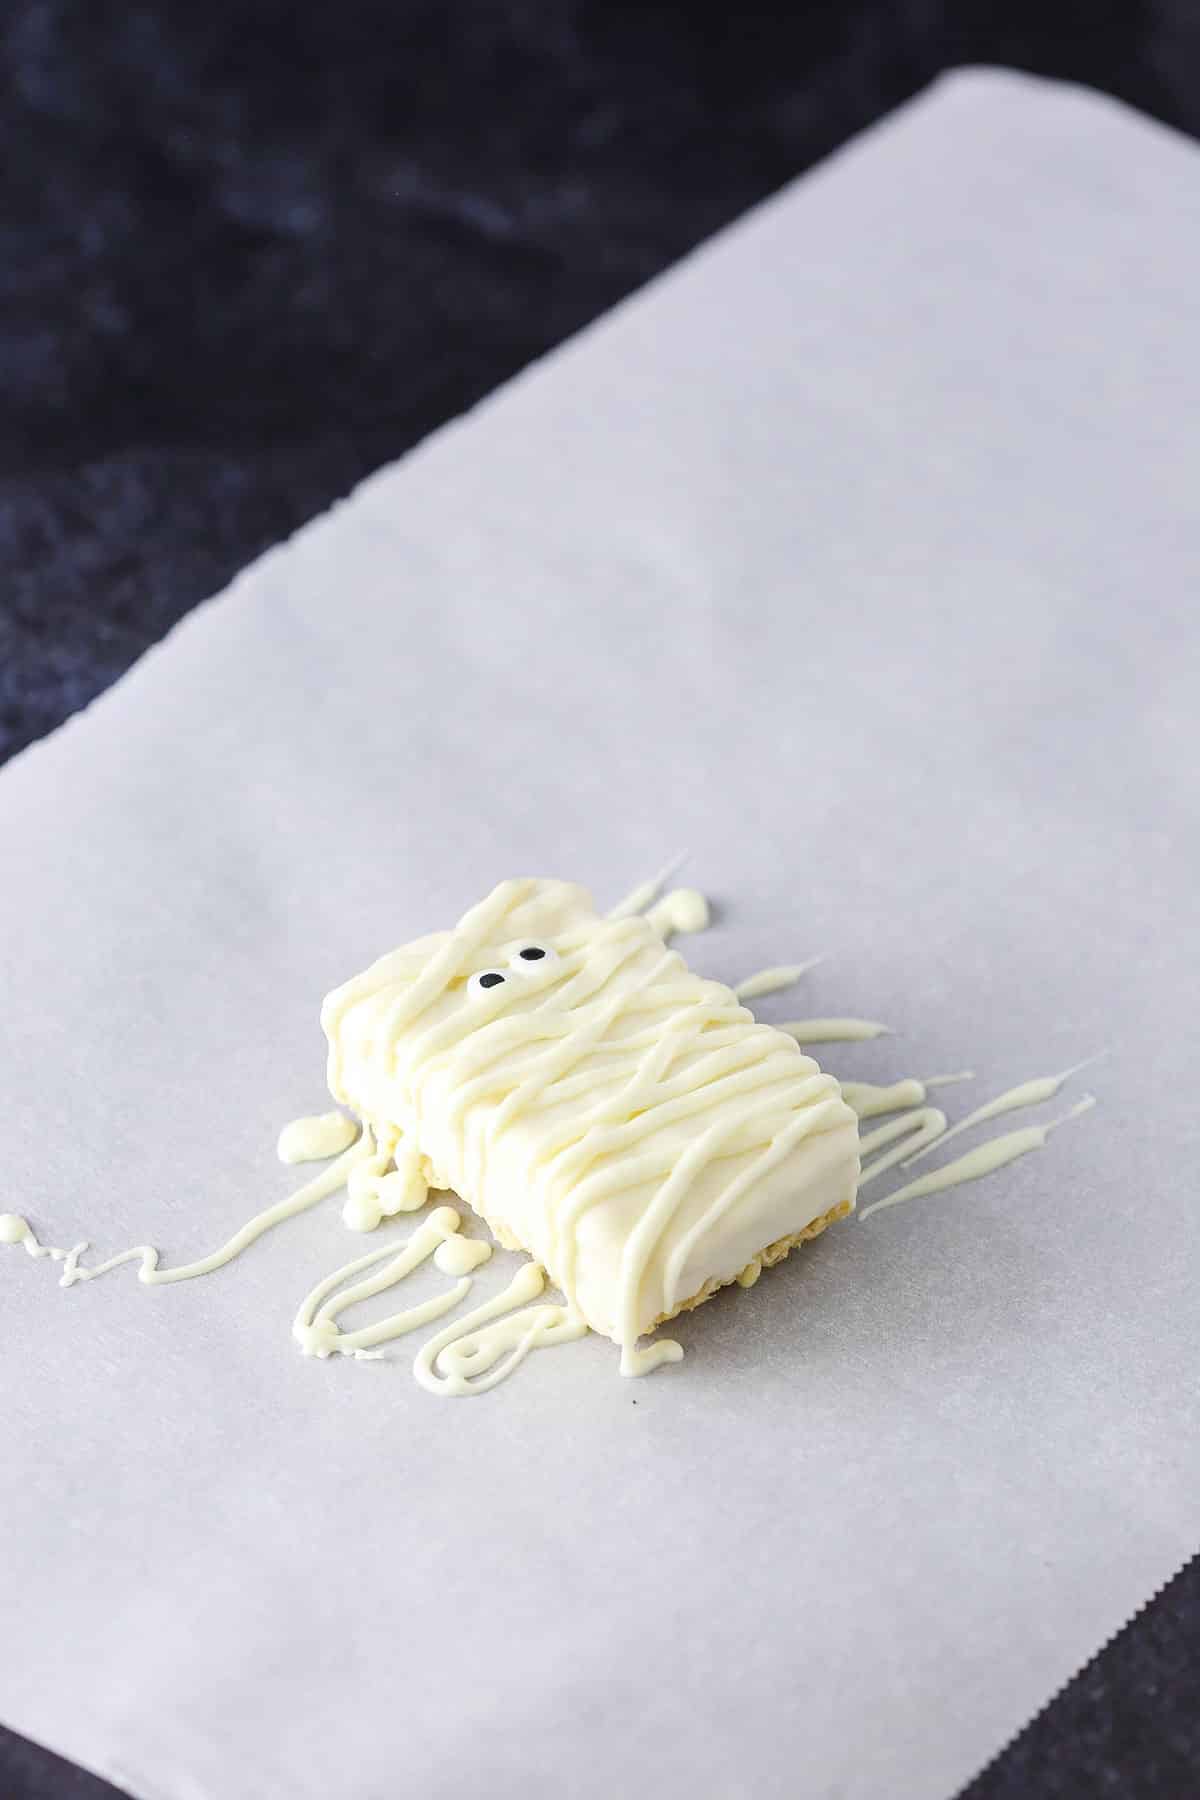 A step in making Mummy Rice Krispies Treats showing the completed treat decorated with eyes and piped white chocolate drying on parchment paper